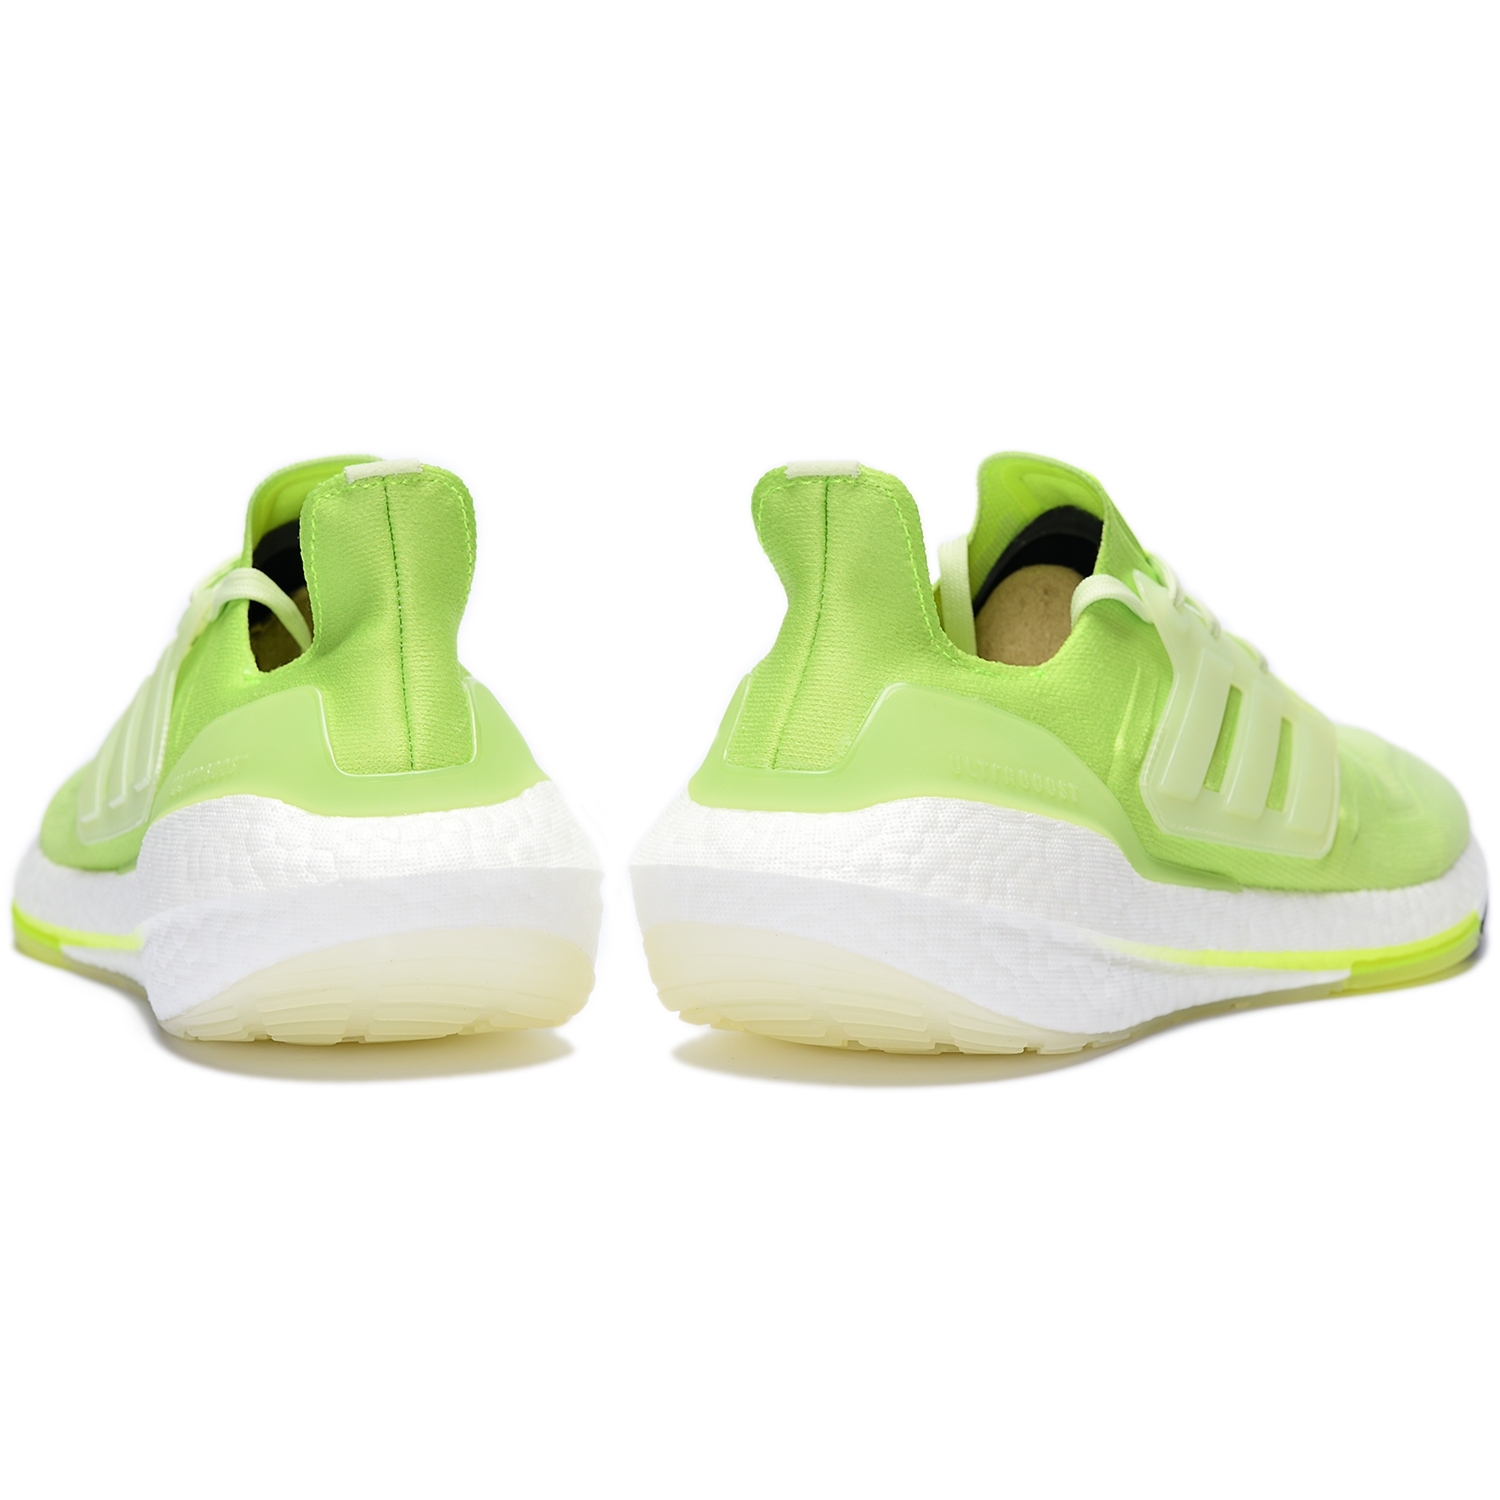 adidas Running ULTRABOOST 22 Almost Lime / Solar Yellow